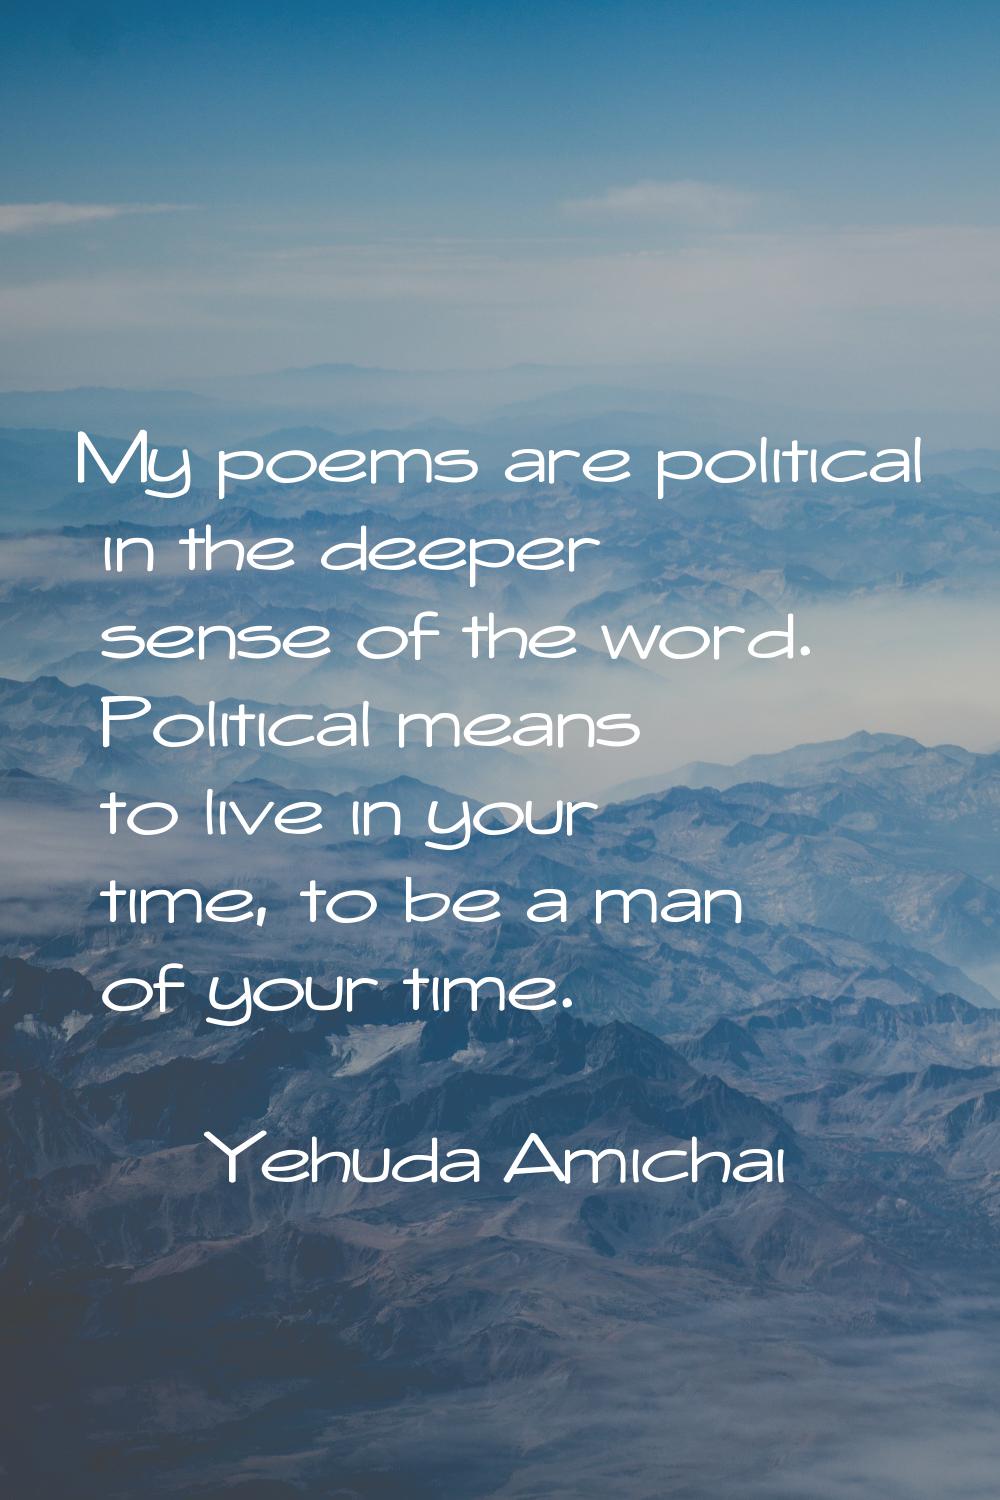 My poems are political in the deeper sense of the word. Political means to live in your time, to be